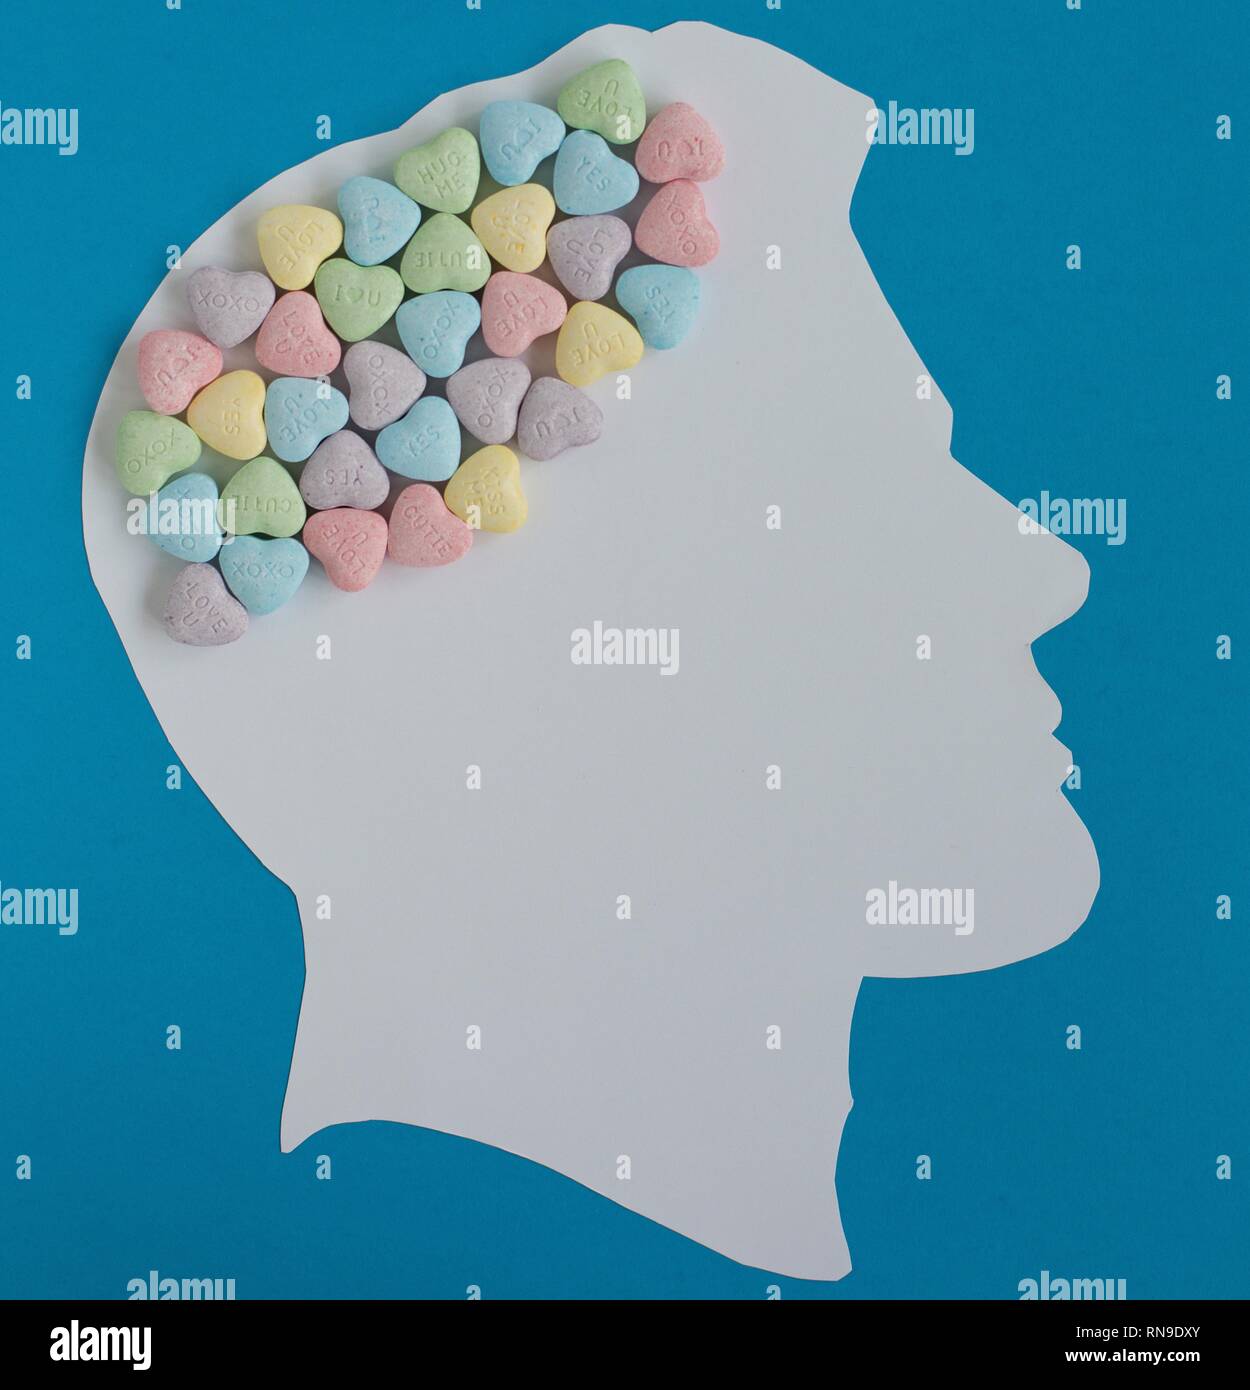 Silhouette of a man's head with candy hearts for a brain. Stock Photo